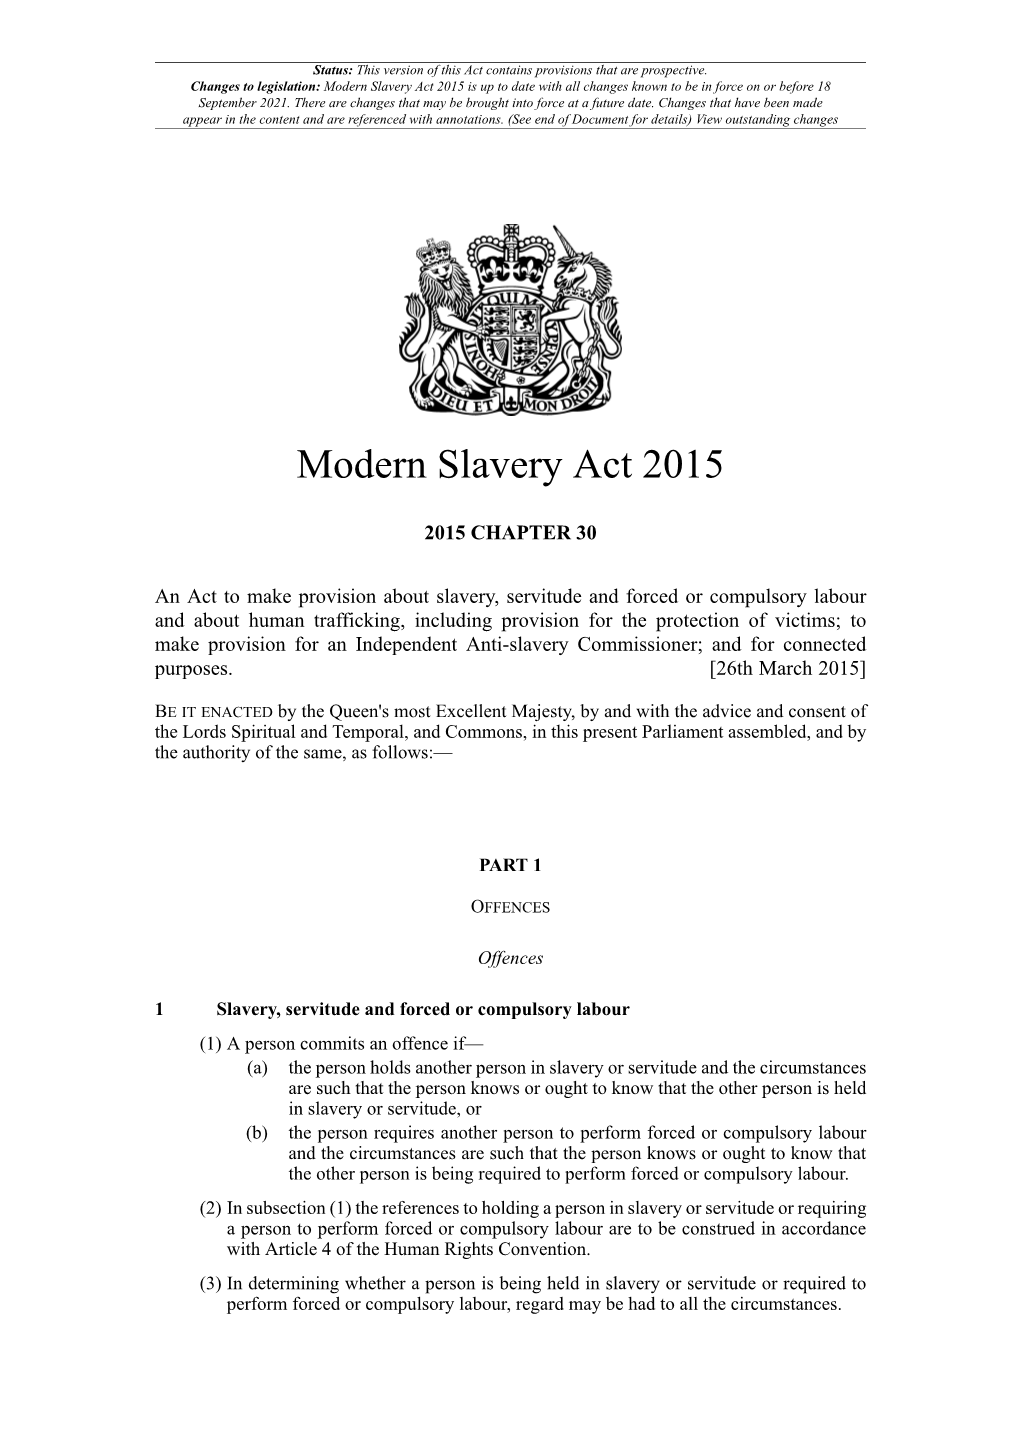 Modern Slavery Act 2015 Is up to Date with All Changes Known to Be in Force on Or Before 18 September 2021